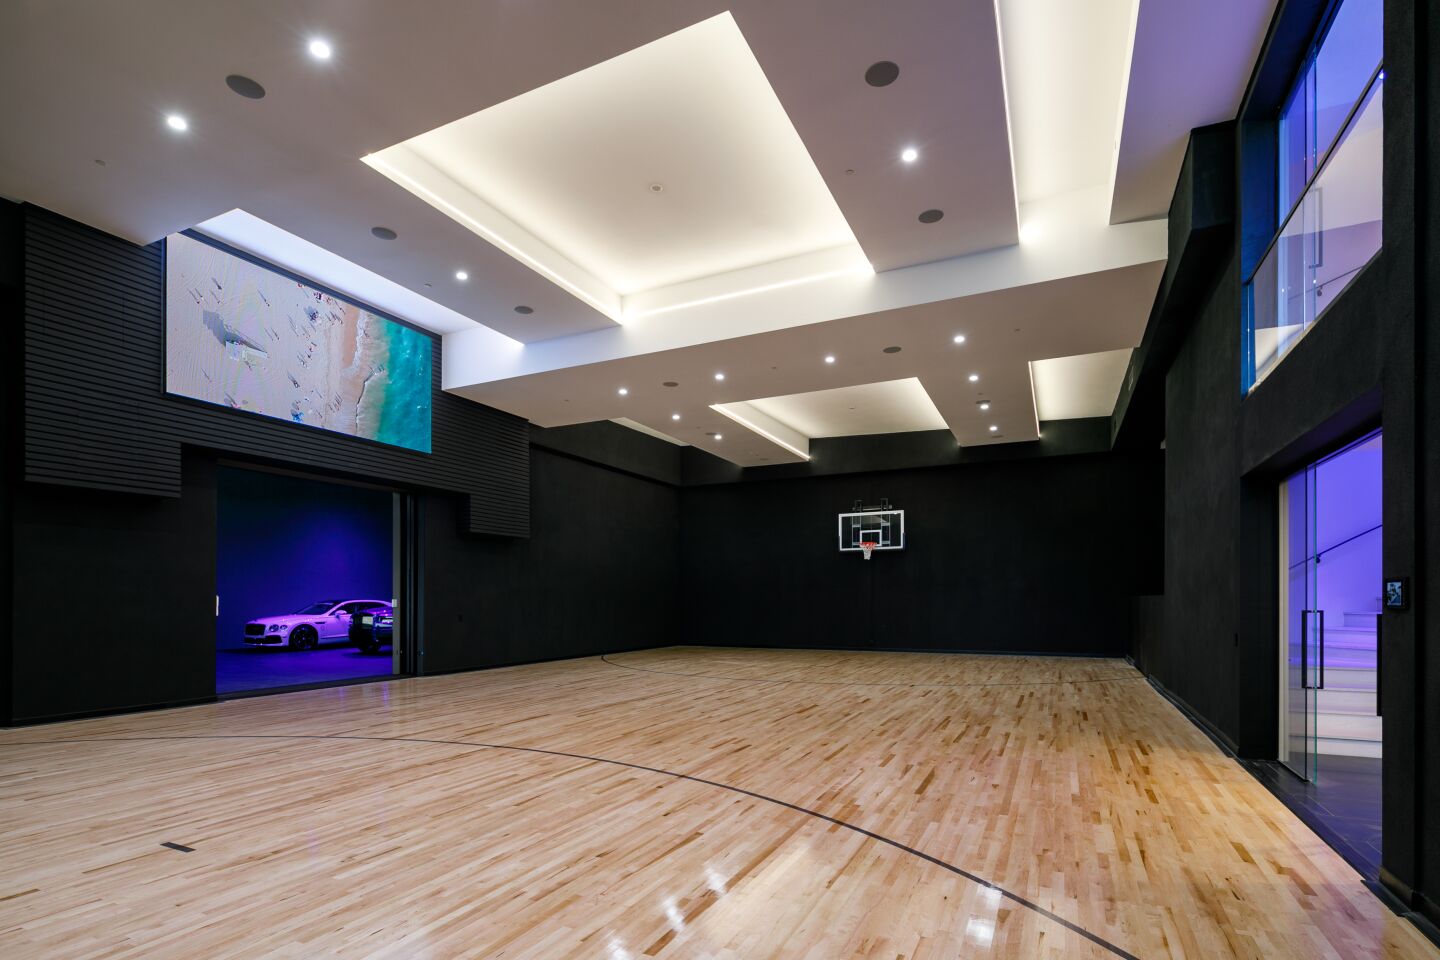 There's an indoor basketball court.